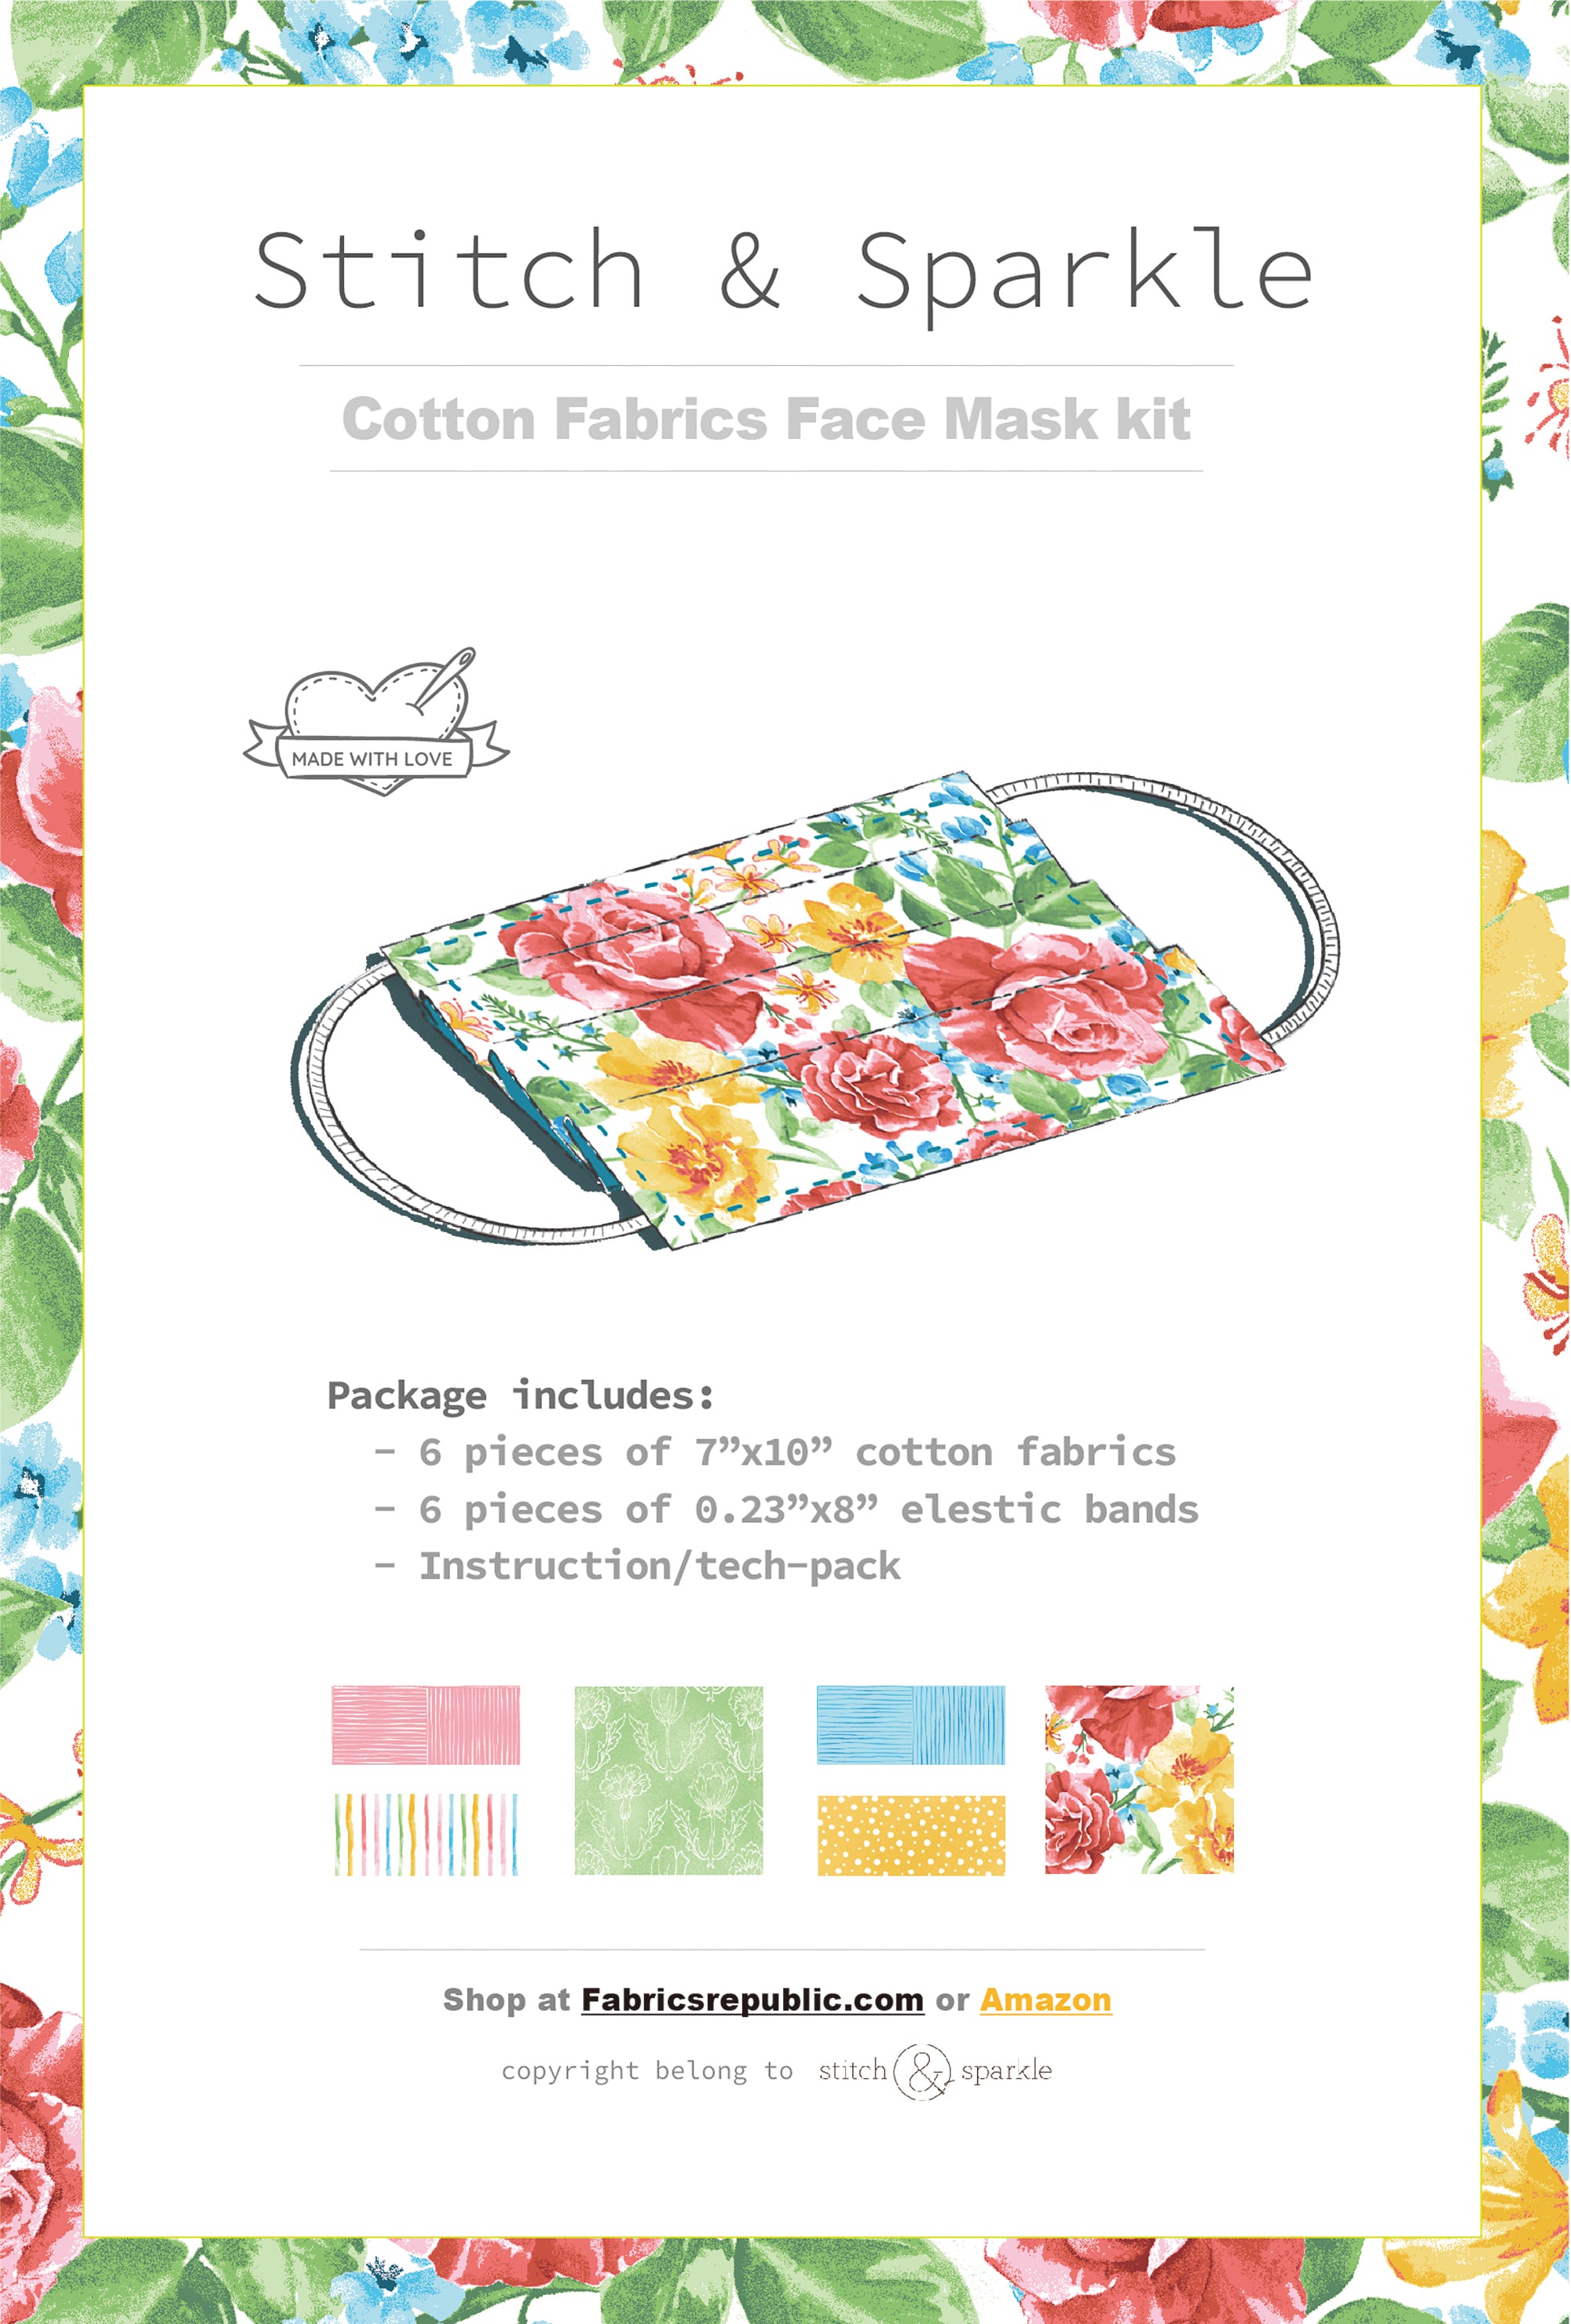 DIY Face Mask Kit for 3 Reuseable Masks.The kit Includes 6 Pieces of 100% Cotton Fabrics and 6 Pieces of Elastic Bands